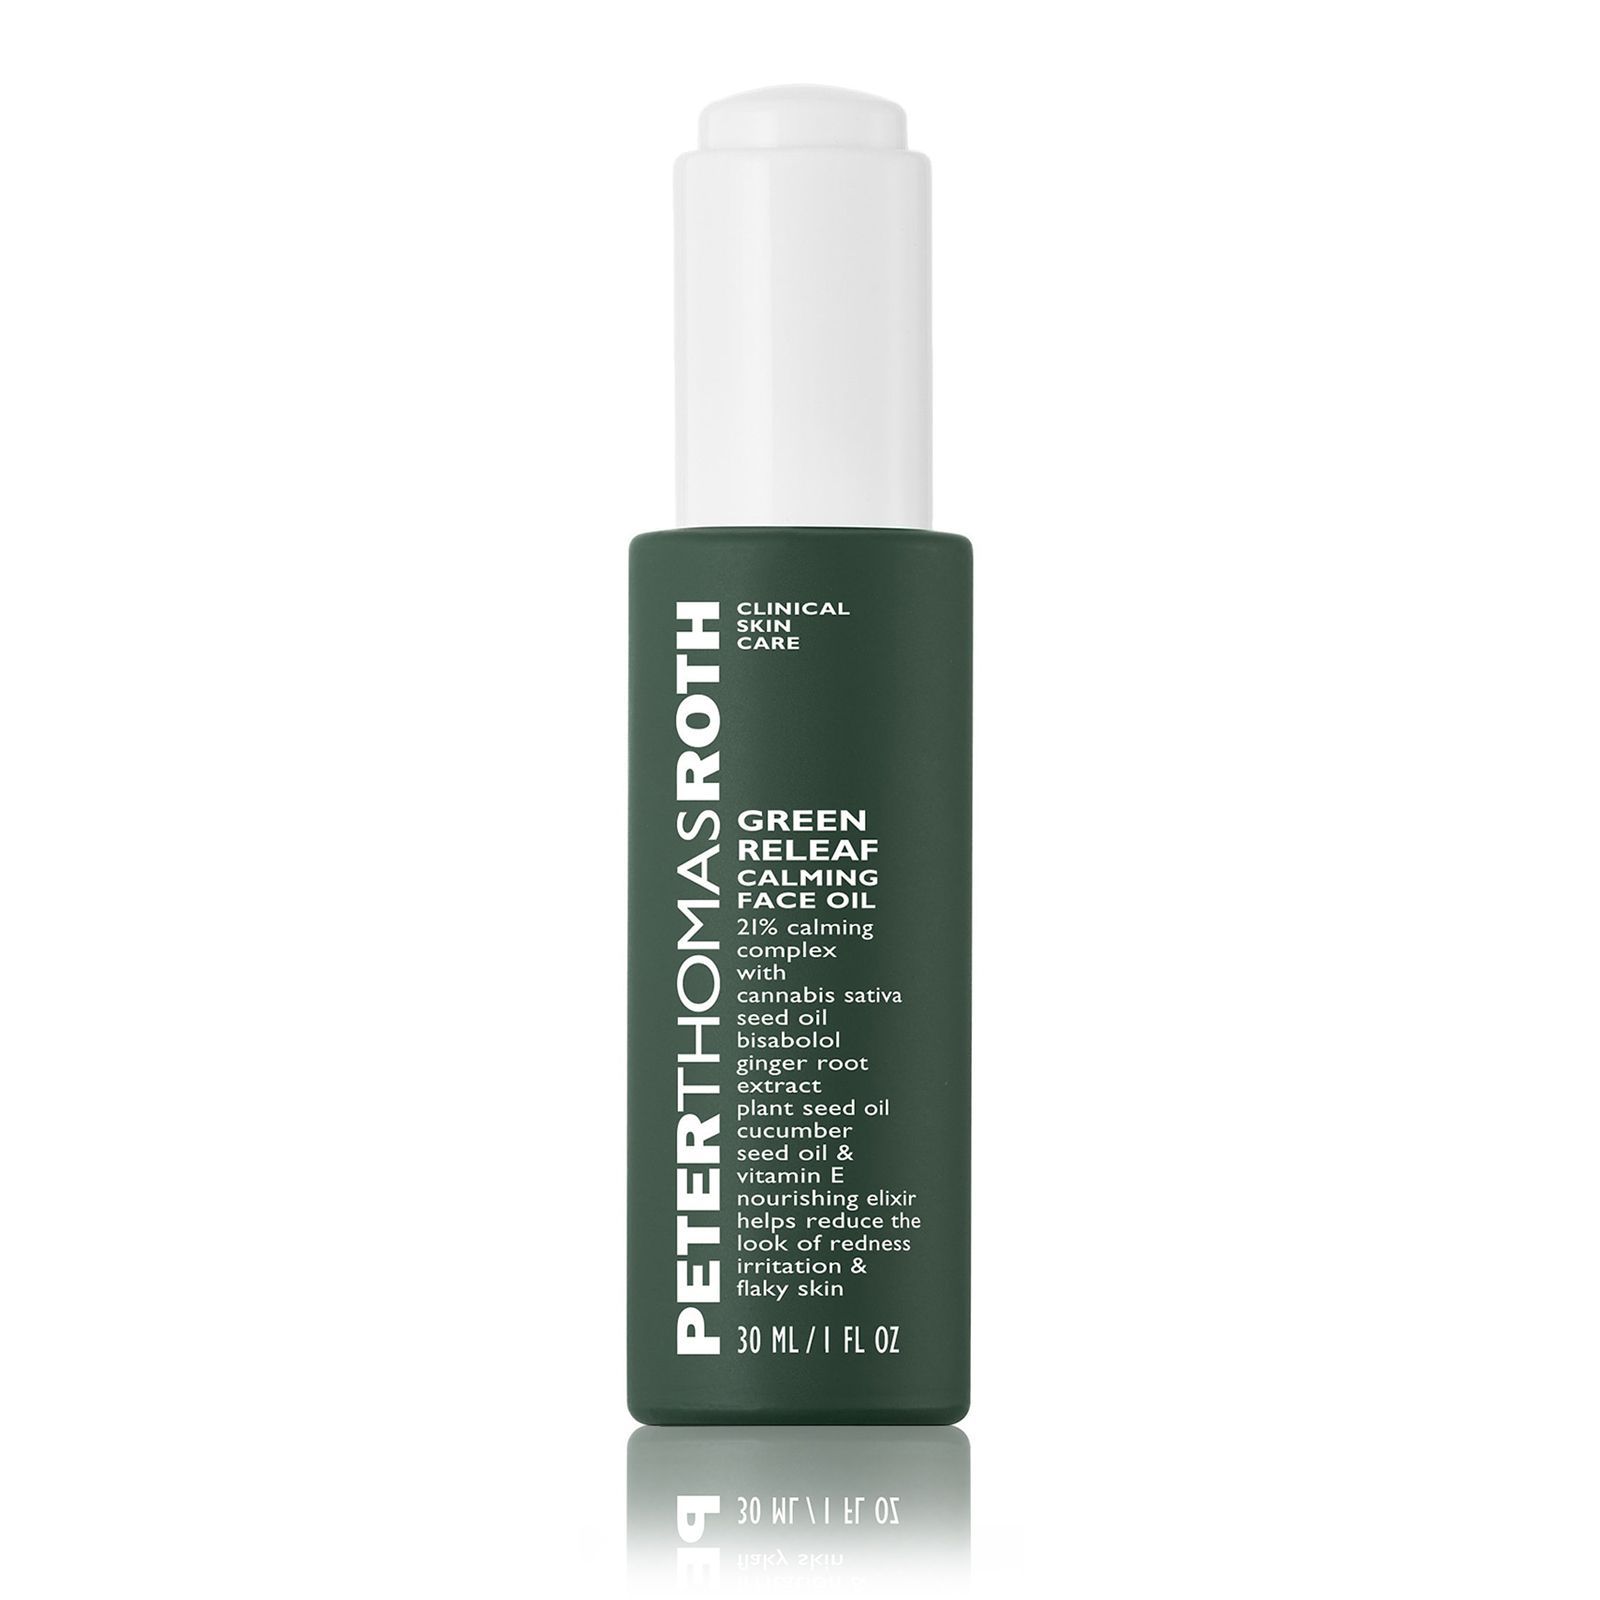 Peter Thomas Roth Green Releaf Calming Face Oil